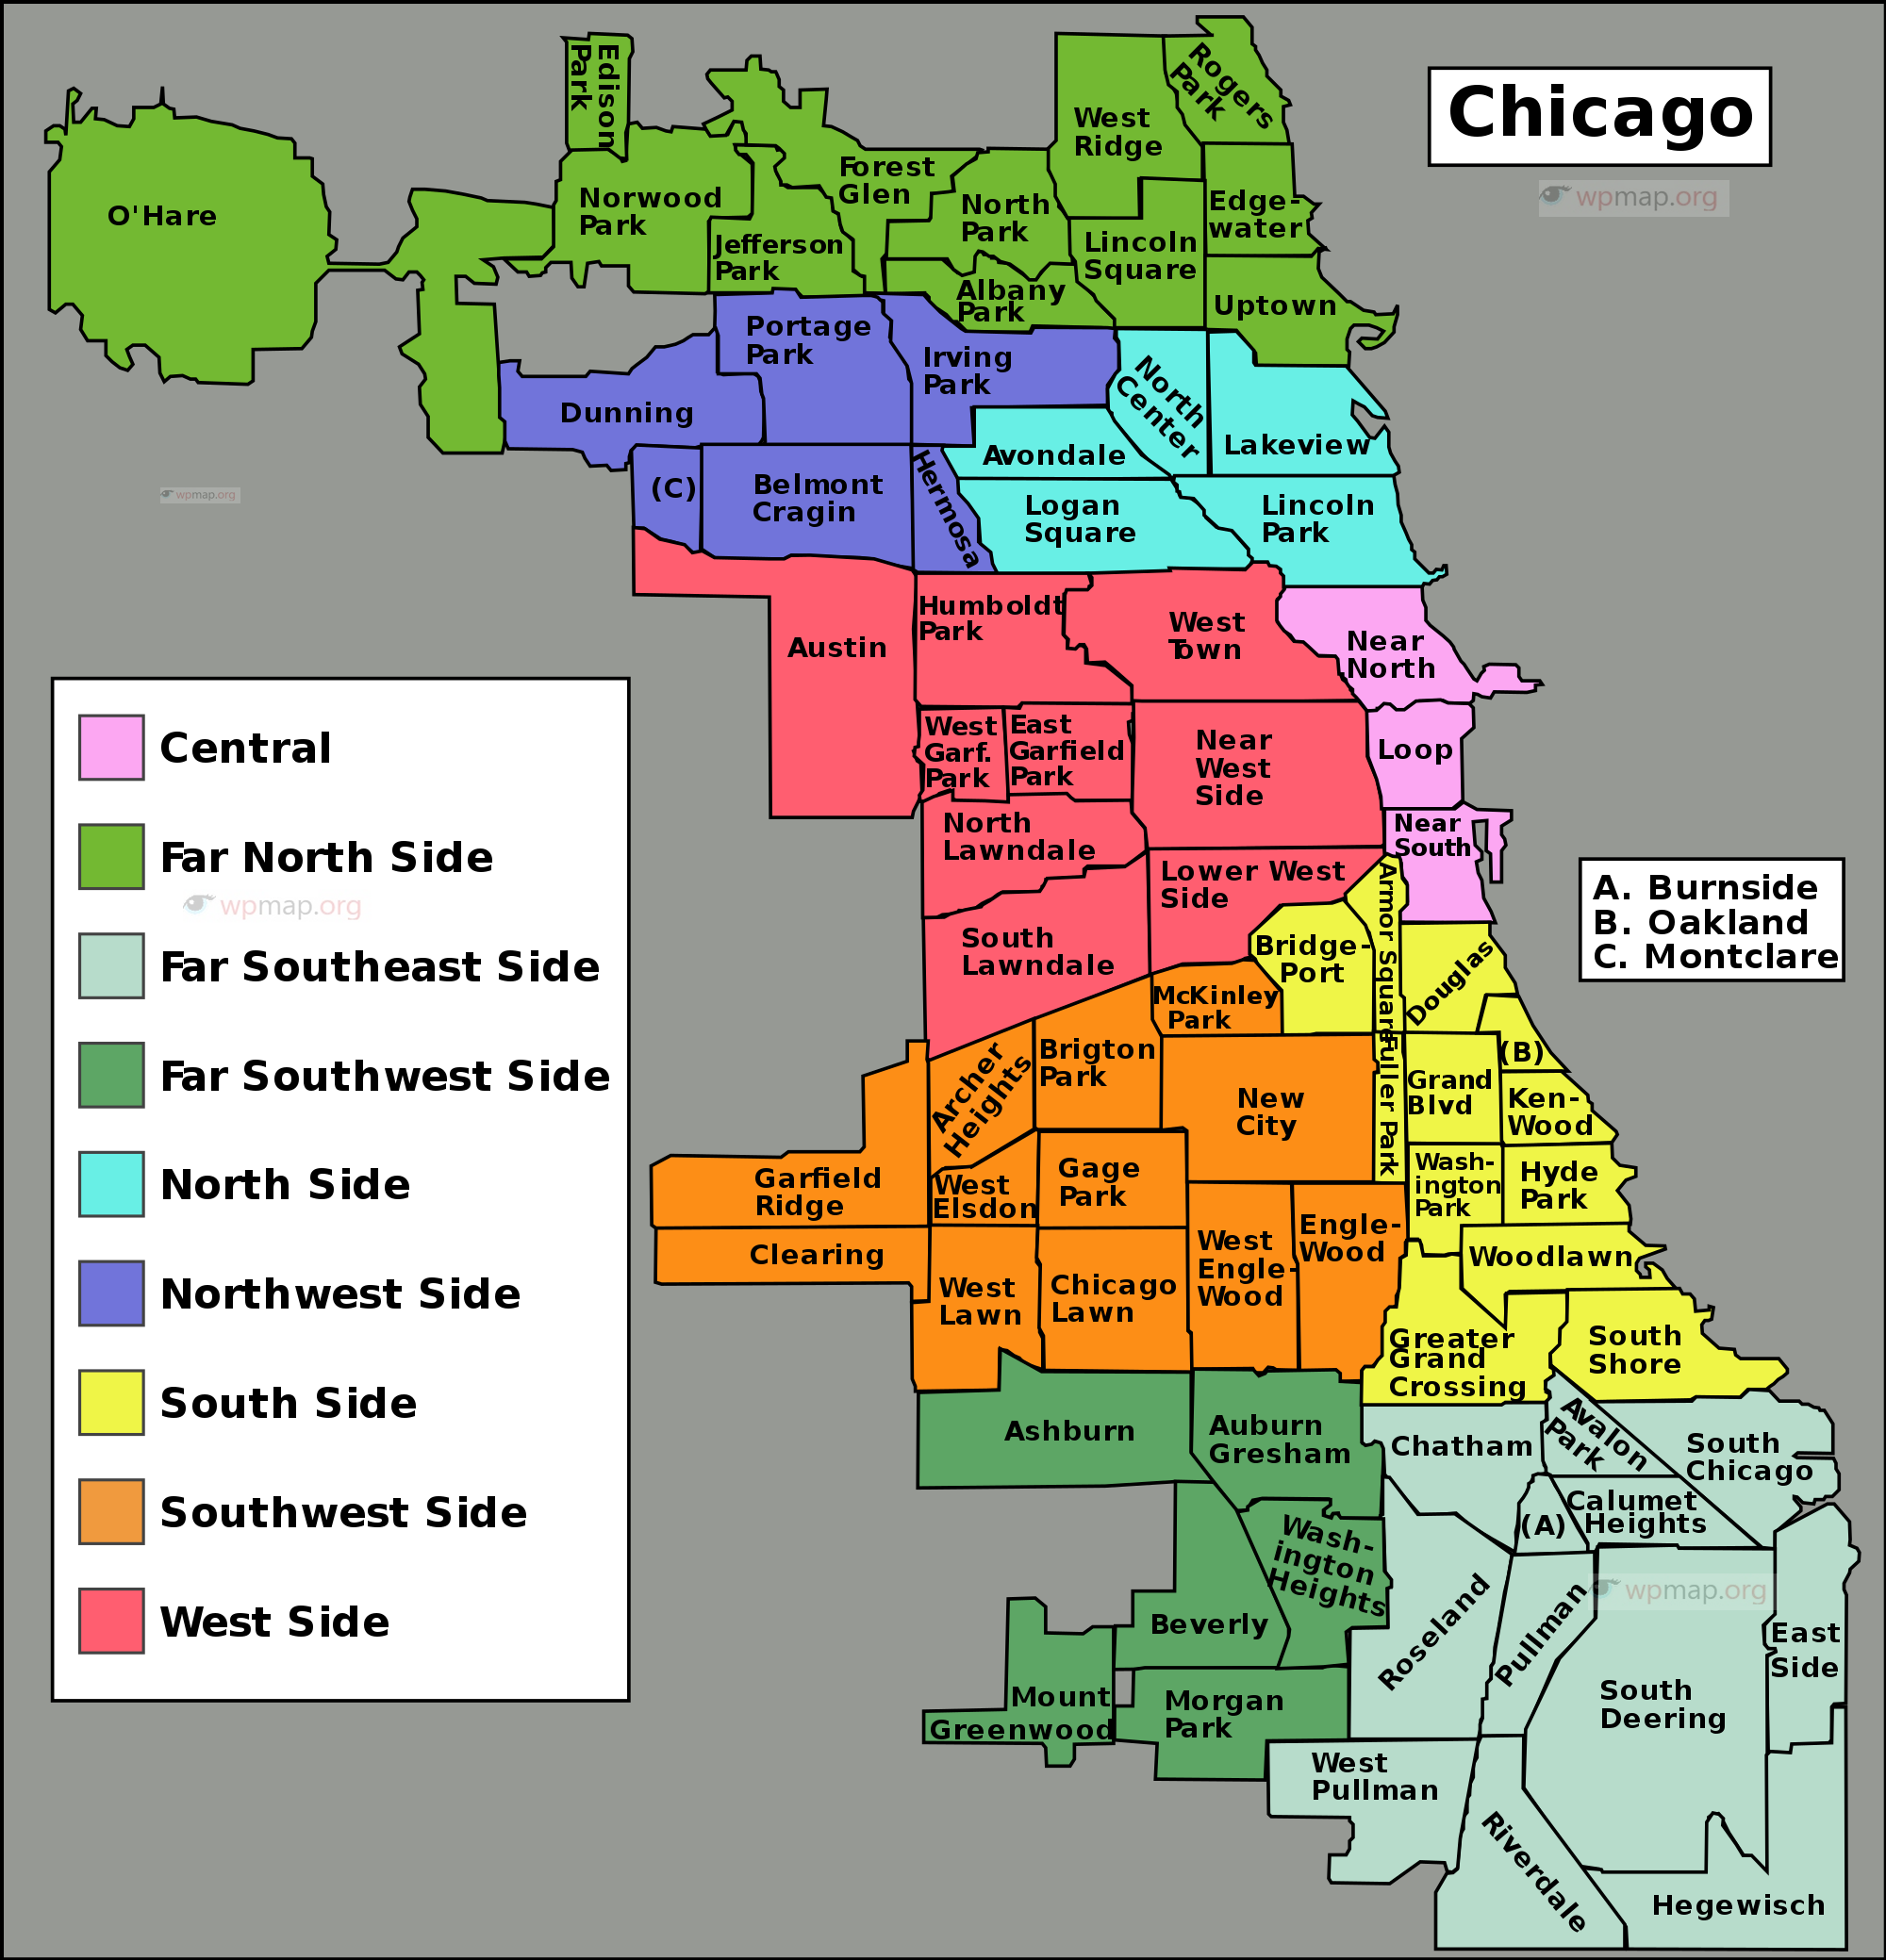 Chicago community areas map